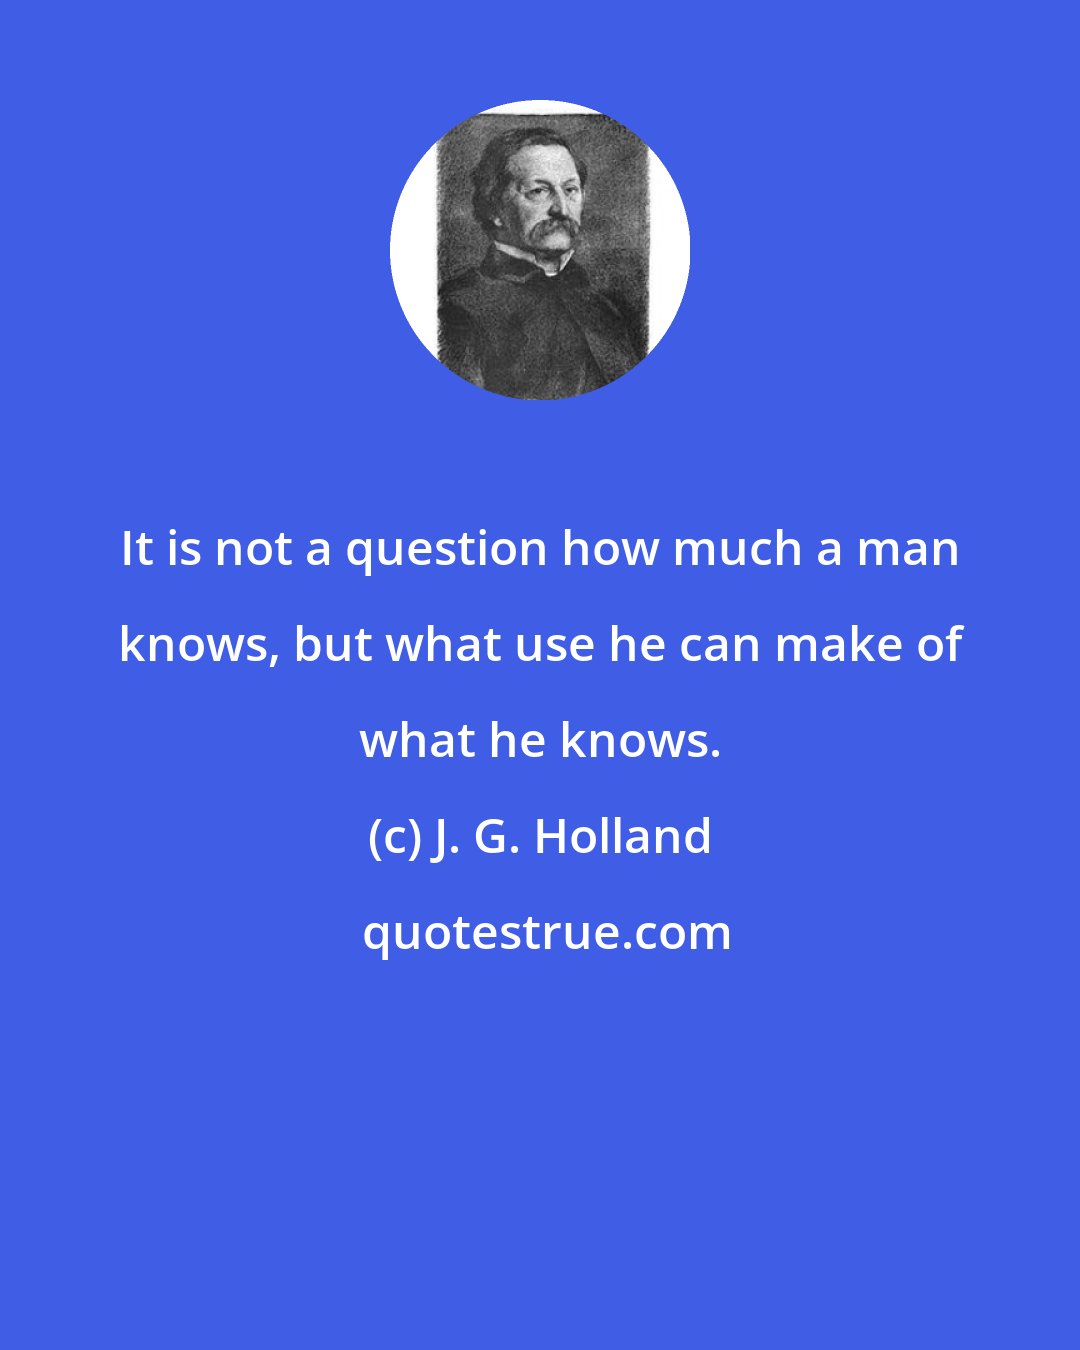 J. G. Holland: It is not a question how much a man knows, but what use he can make of what he knows.